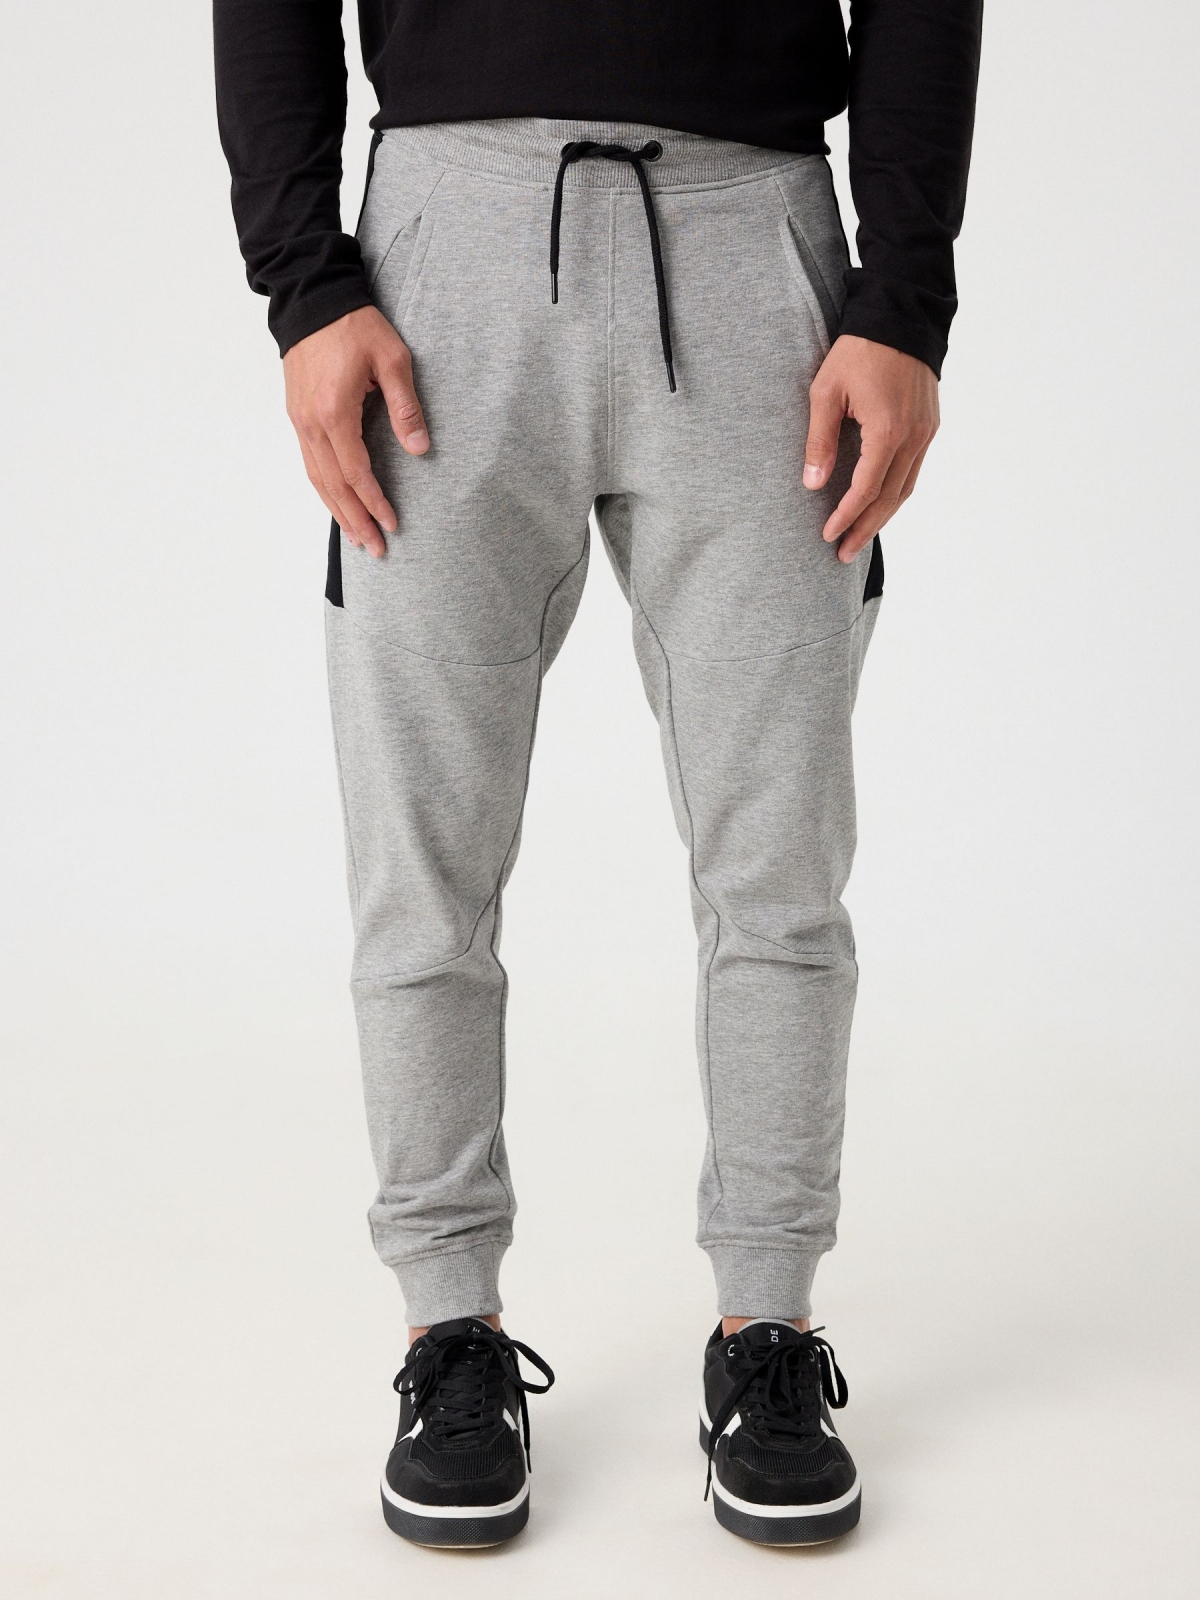 Sport jogger pants grey middle front view